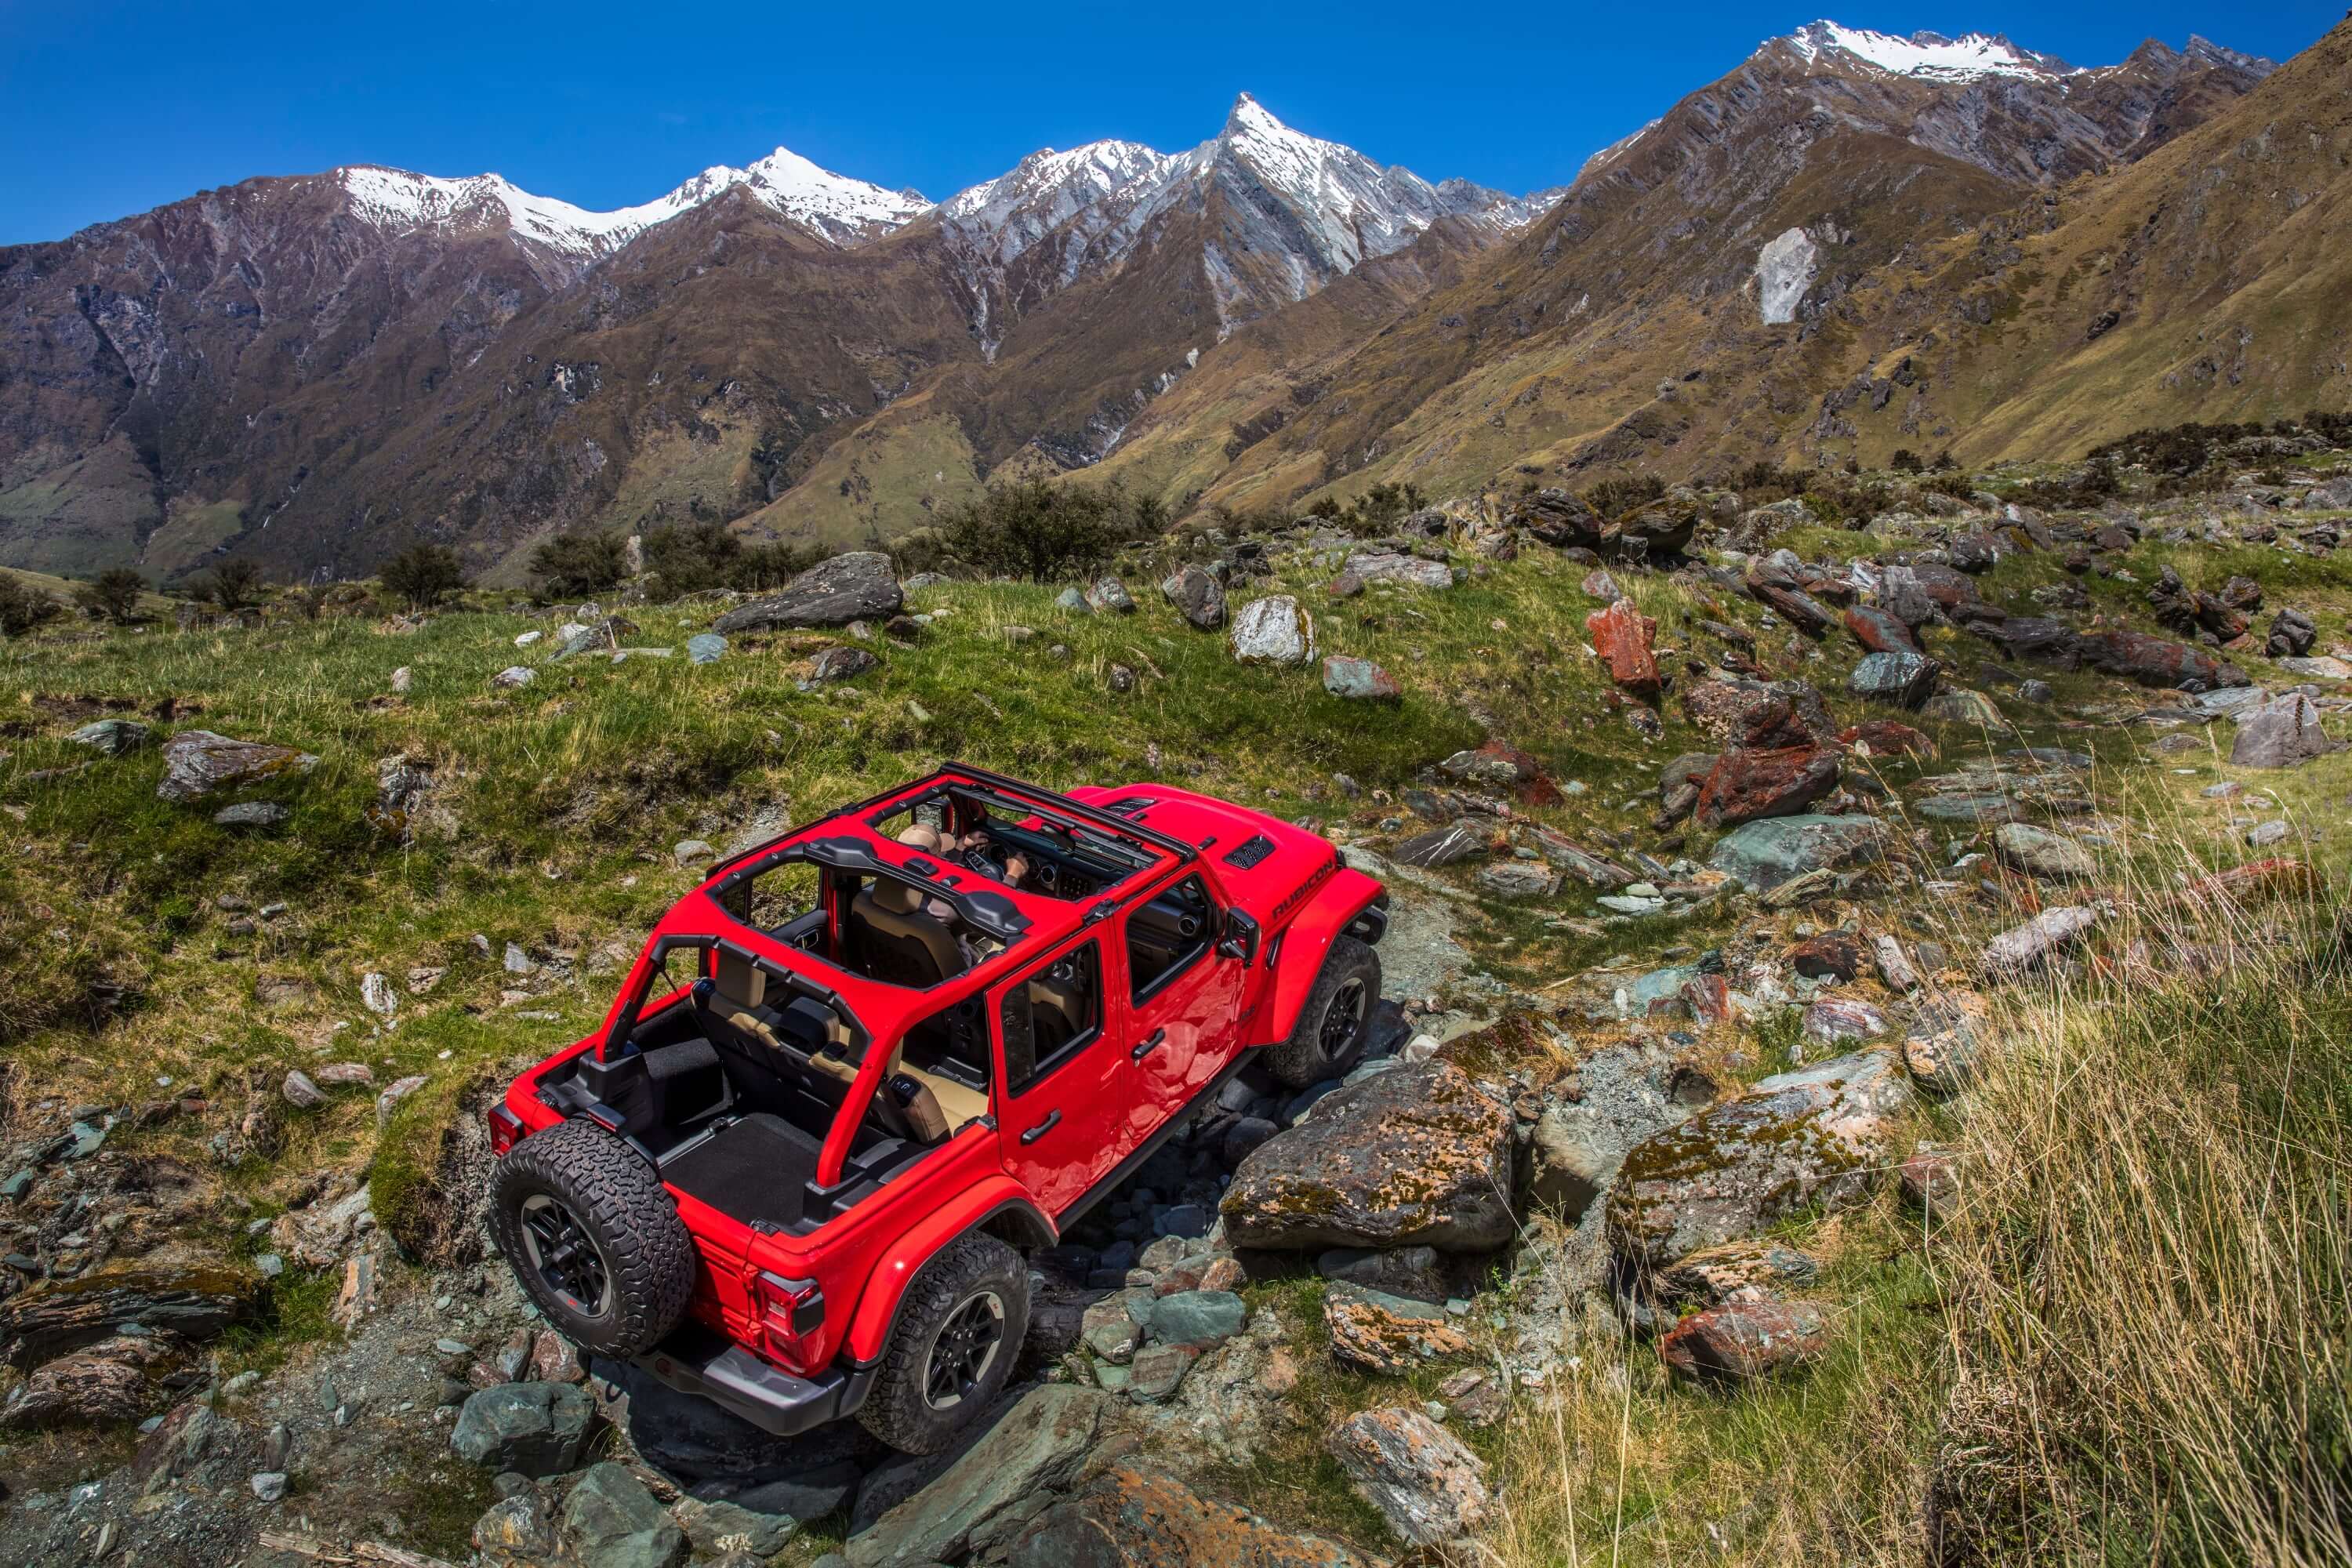 Jeep Wrangler Rubicon Comes Ready To Roll